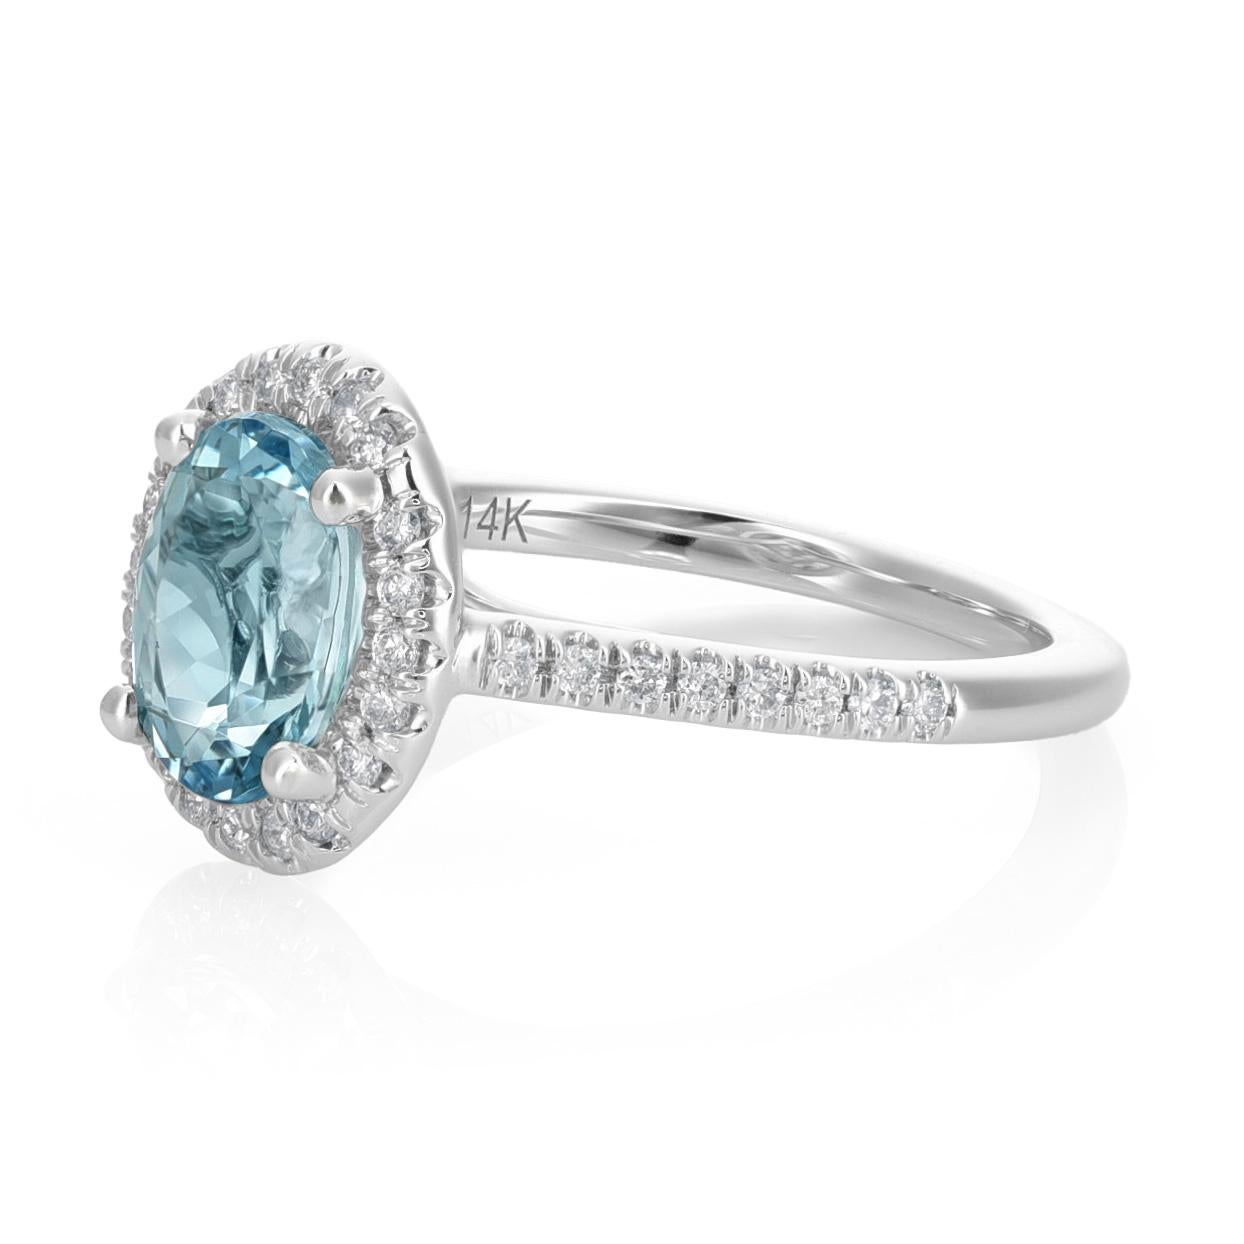 Experience sophistication with this 14K White gold ring showcasing a 0.66-carat natural oval-cut aquamarine. The aquamarine's color is enhanced through a meticulous heating process, adding a captivating touch. Surrounding the center stone, 0.17